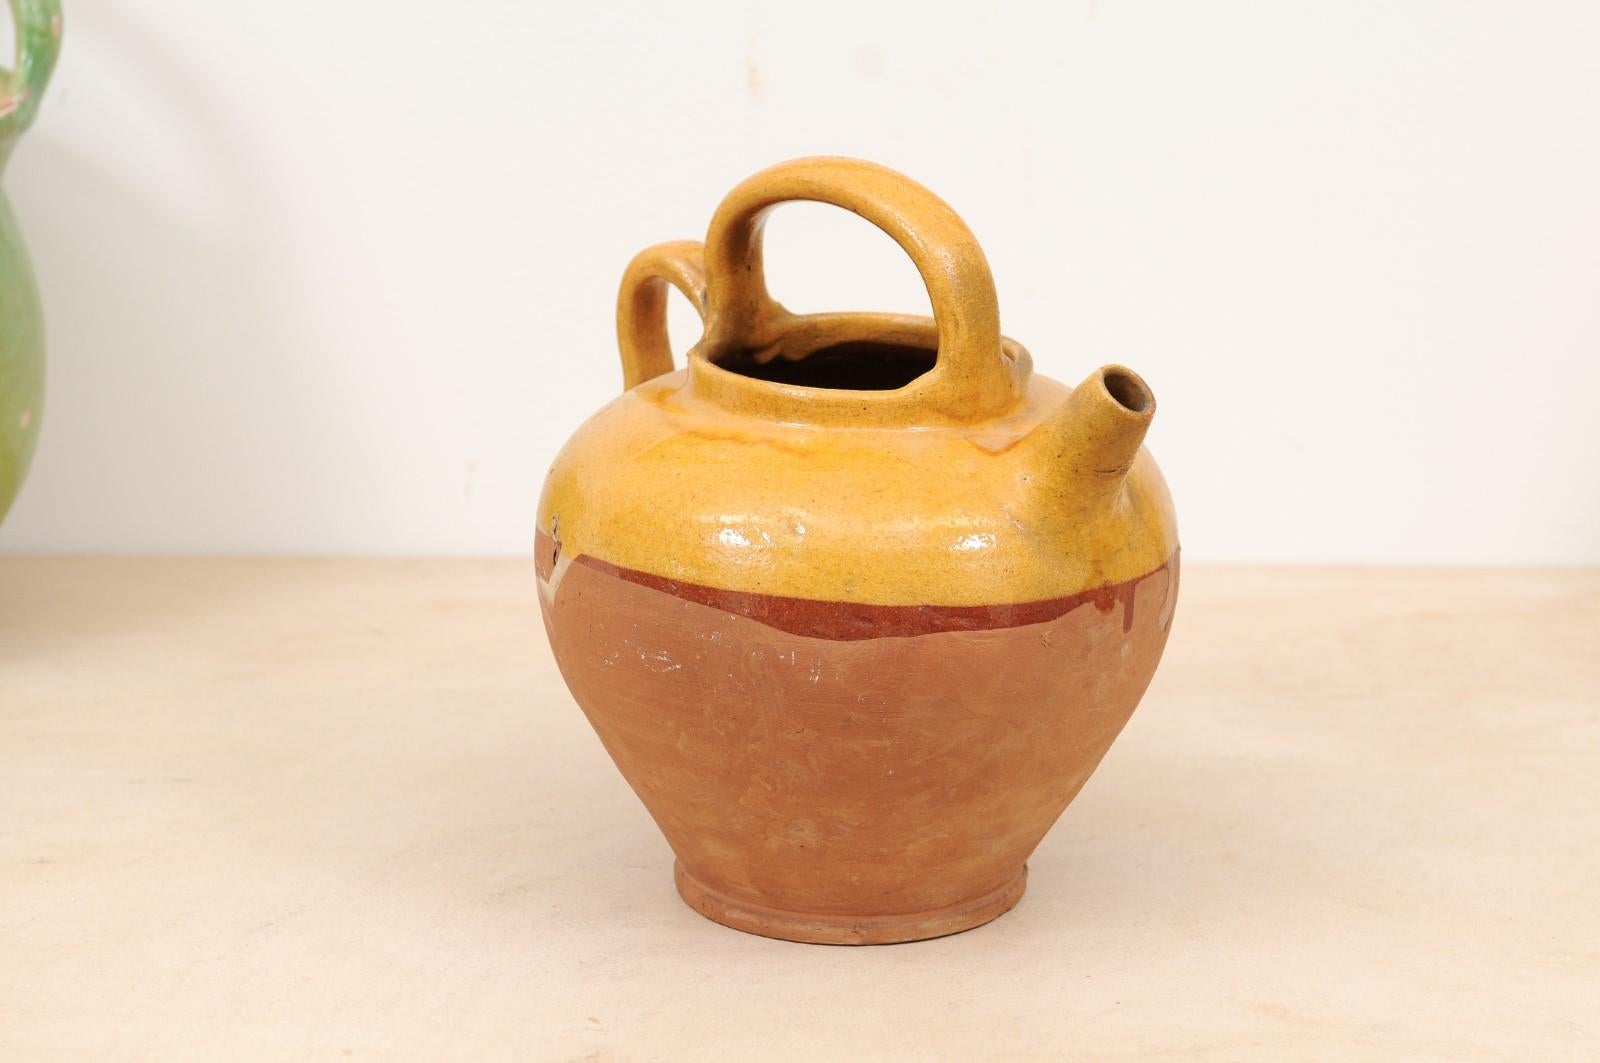 A Southern French olive oil pot from the 19th century, with yellow glazed décor and two handles. Created in Southern France during the 19th century, this Provençal olive oil pot features a circular tapering body adorned with yellow glaze in its